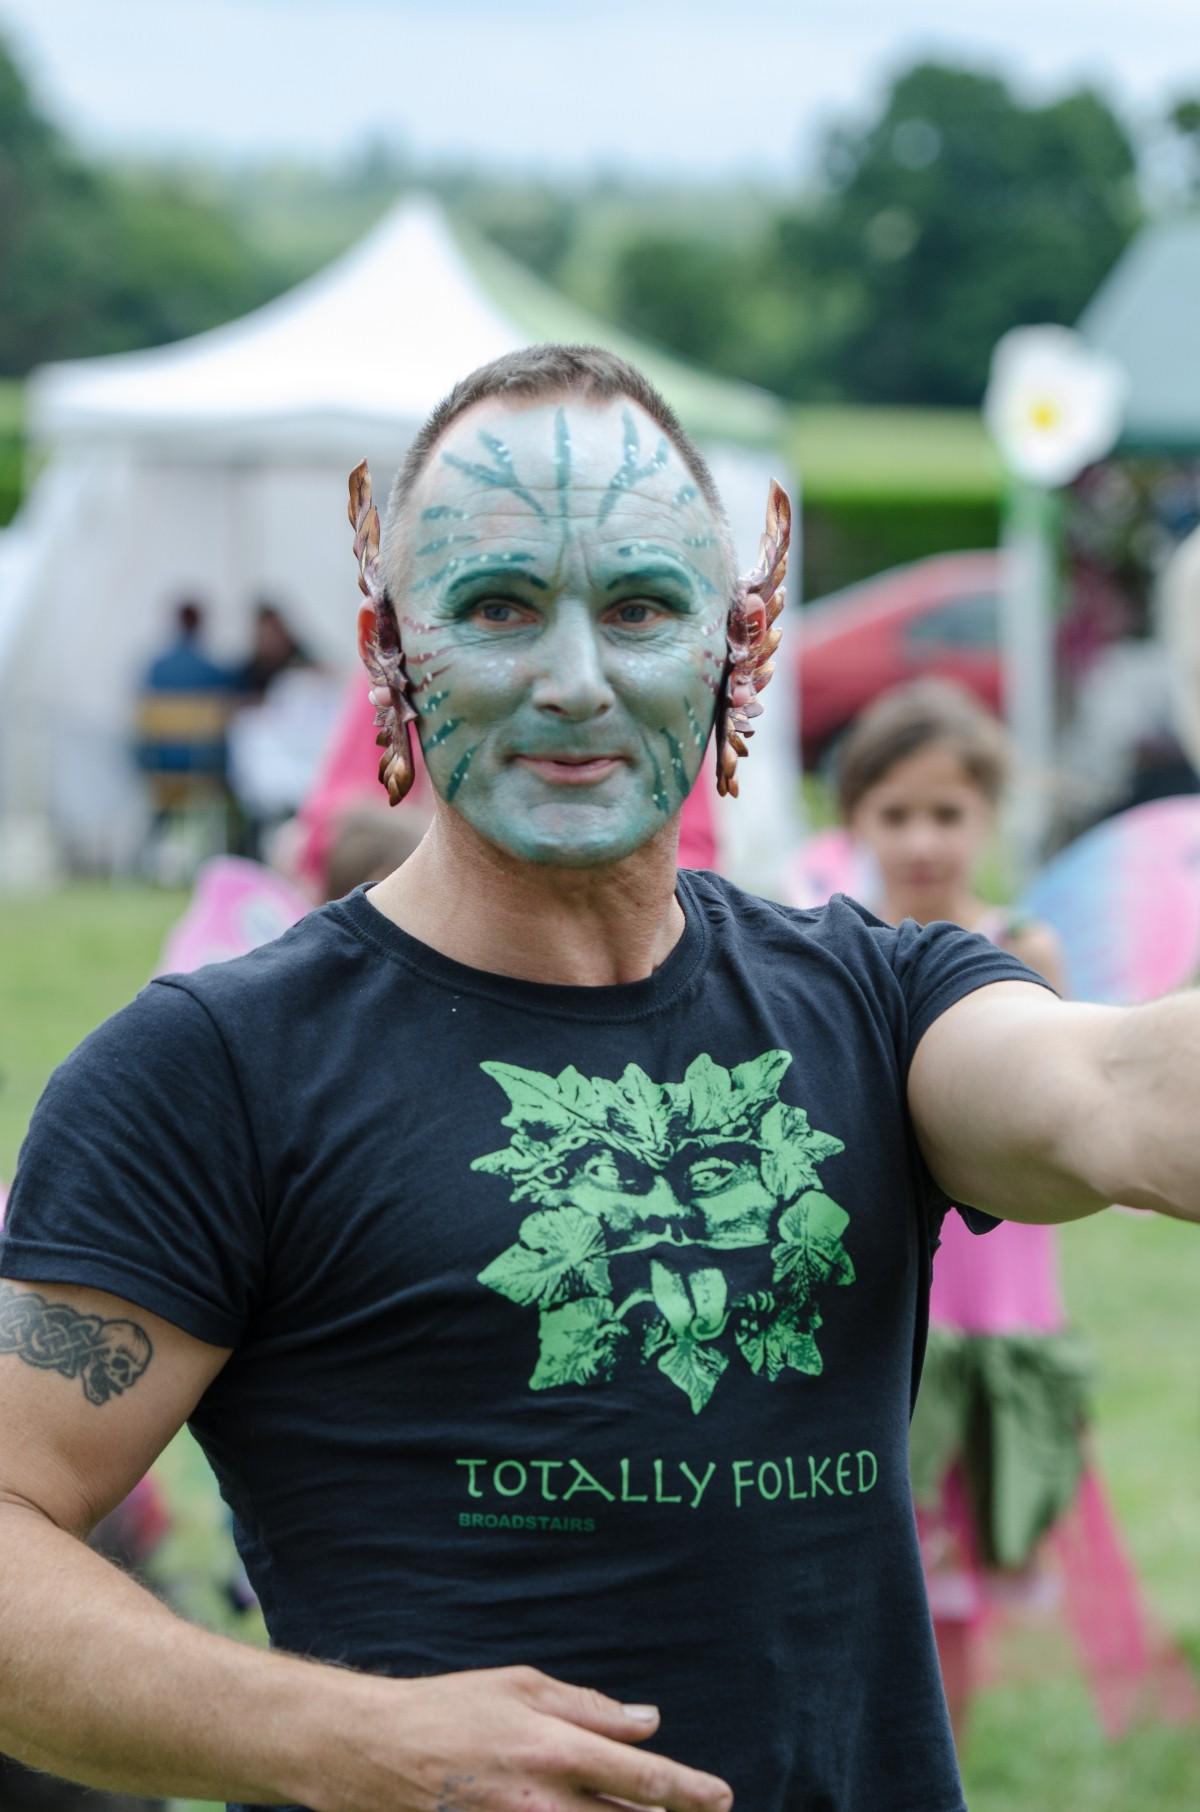 Picture from the New Forest Fairy Festival.